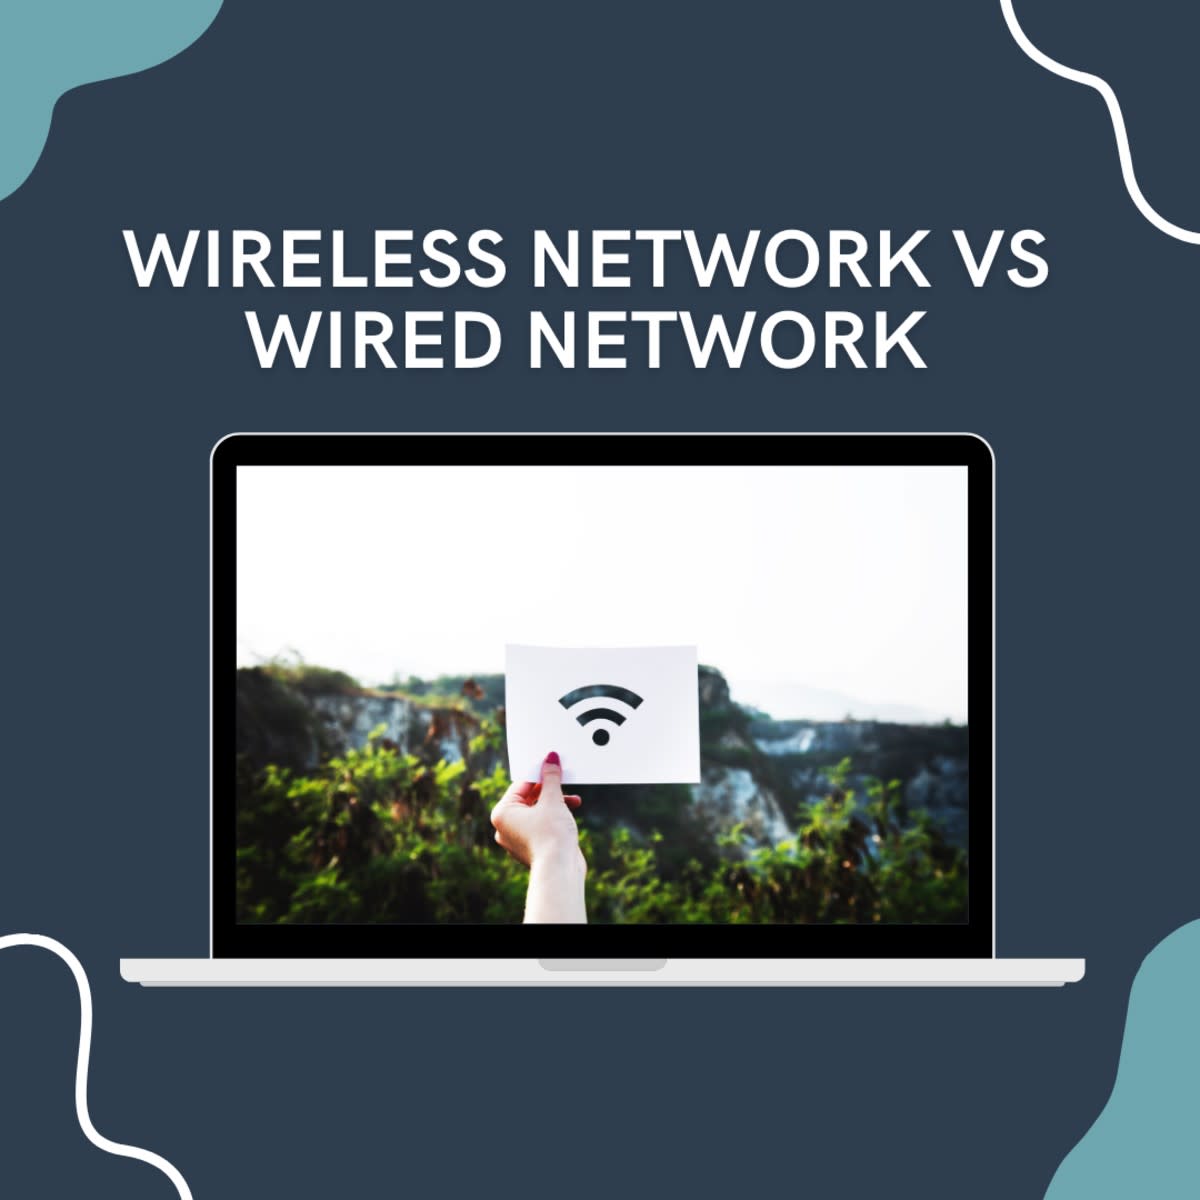 Wired Internet Connection vs. Wireless: Which Is Better?